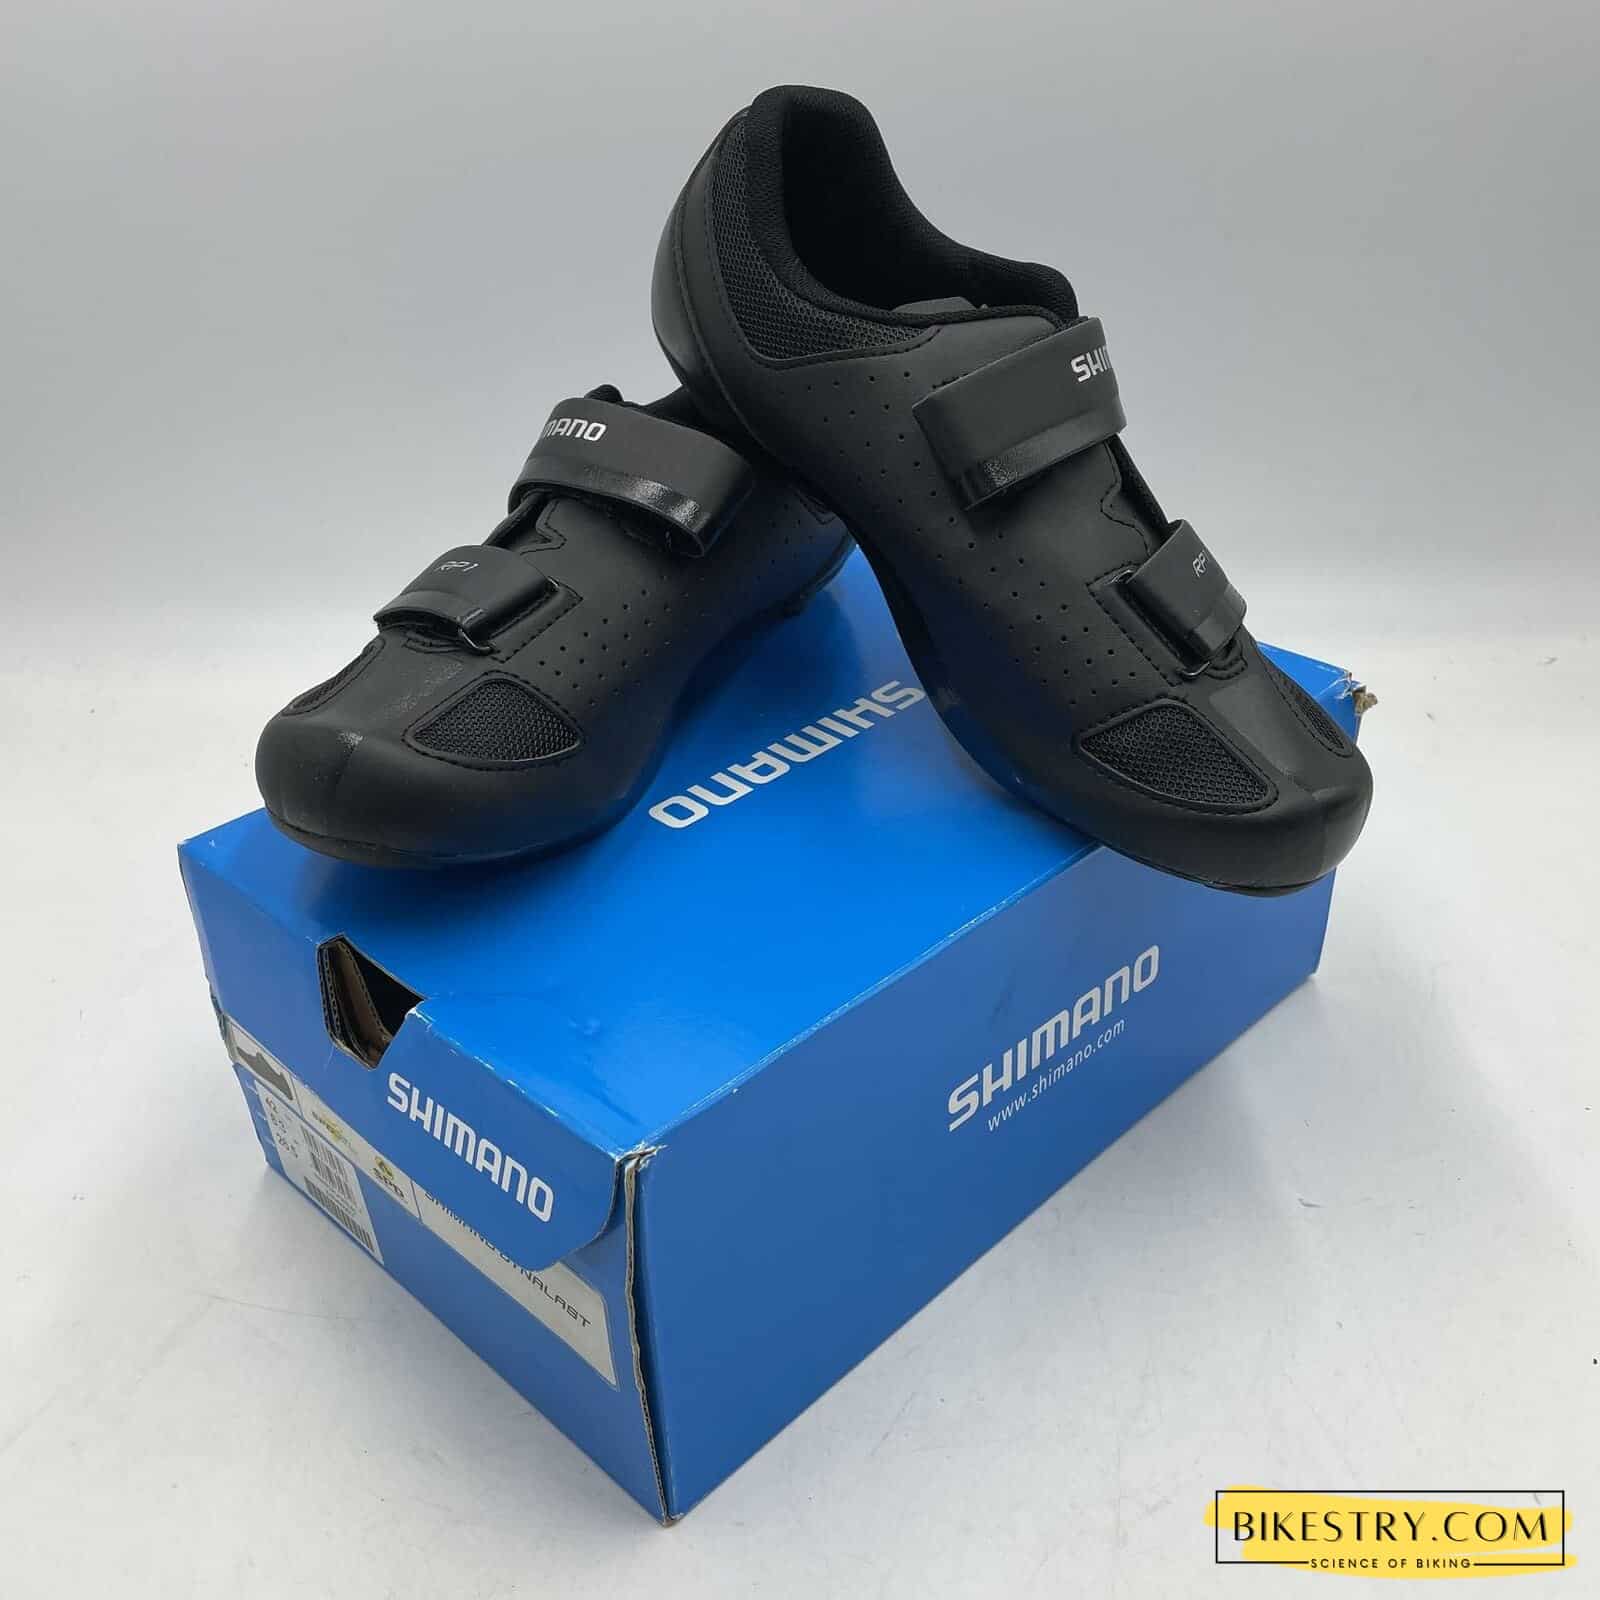 Shimano SH-RP - Work Well with Wide Feet